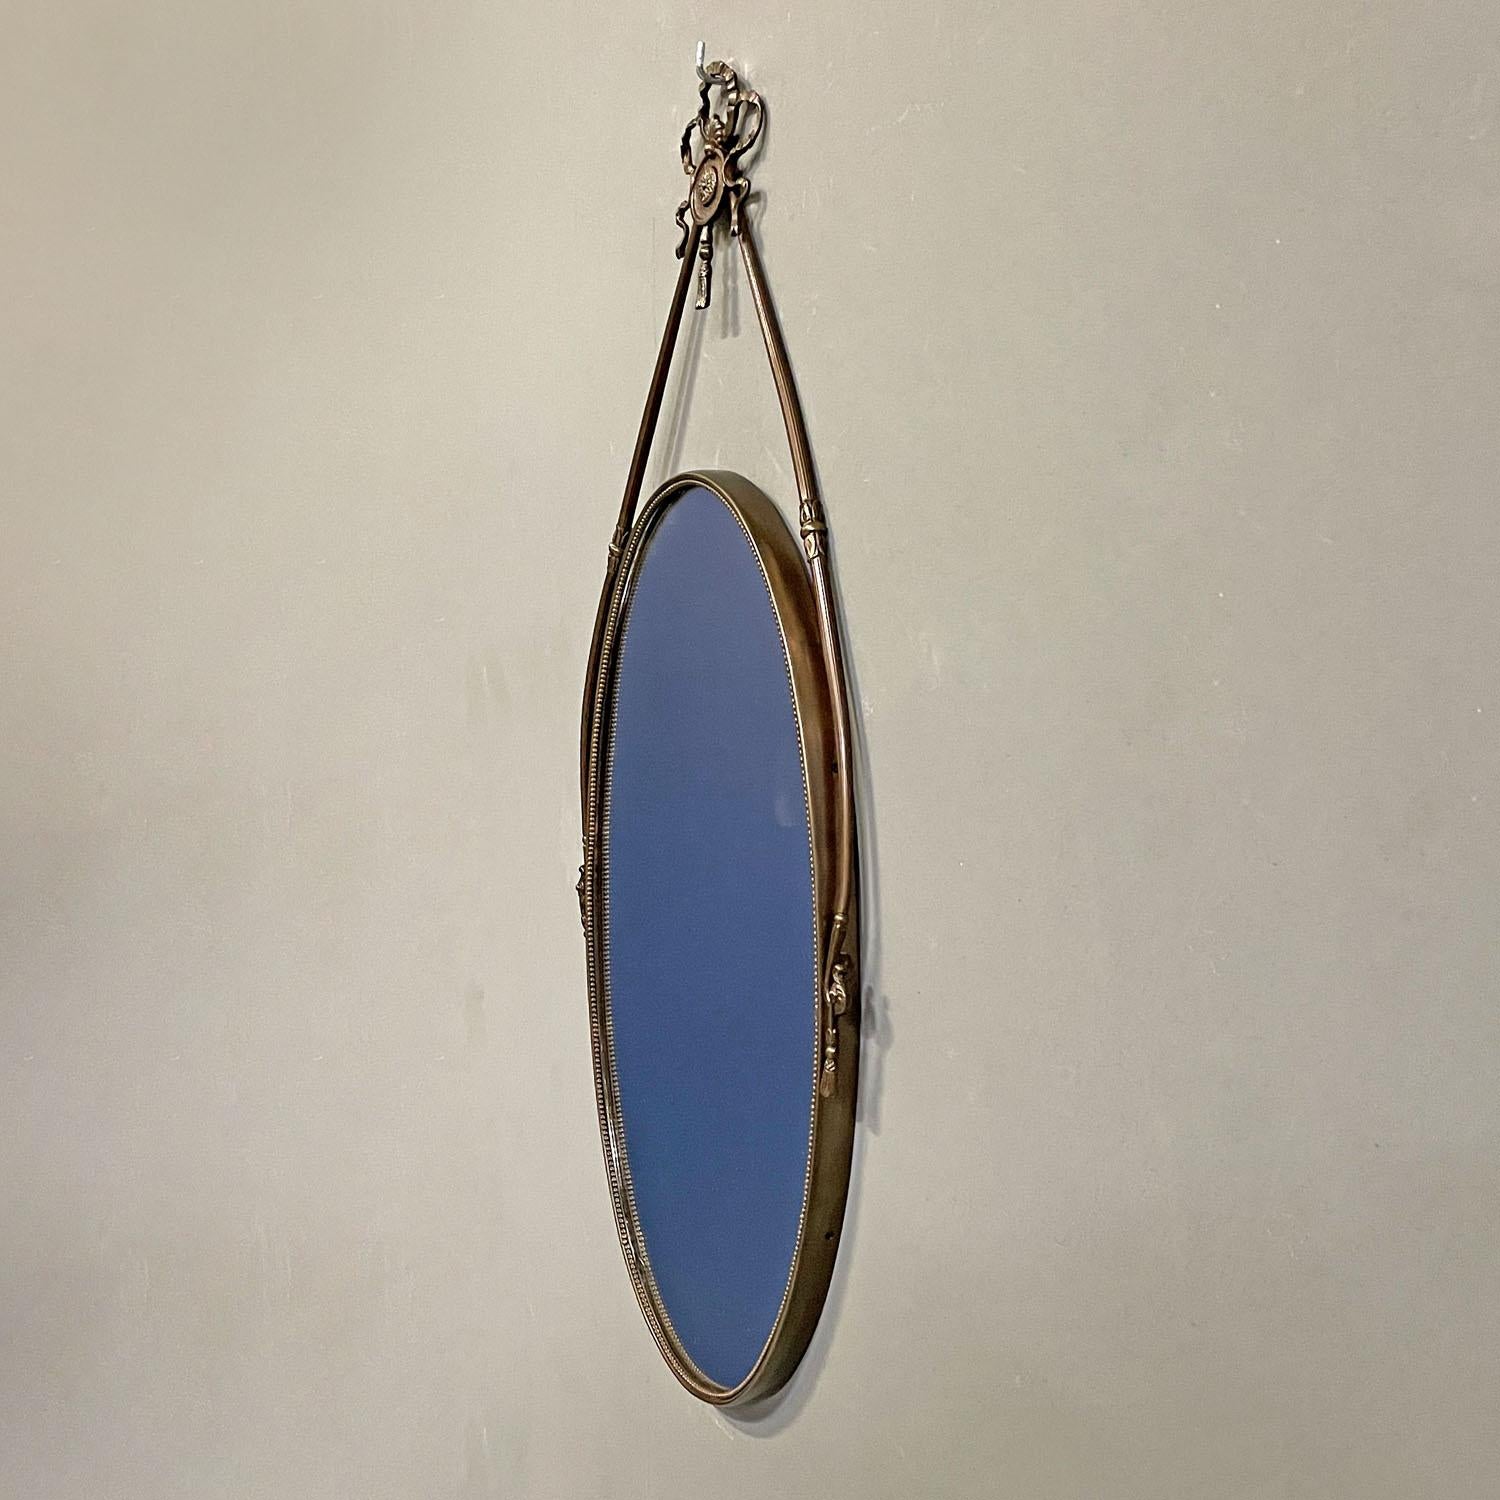 Mid-20th Century Italian mid-century modern brass wall mirror with ribbon and decorations, 1950s